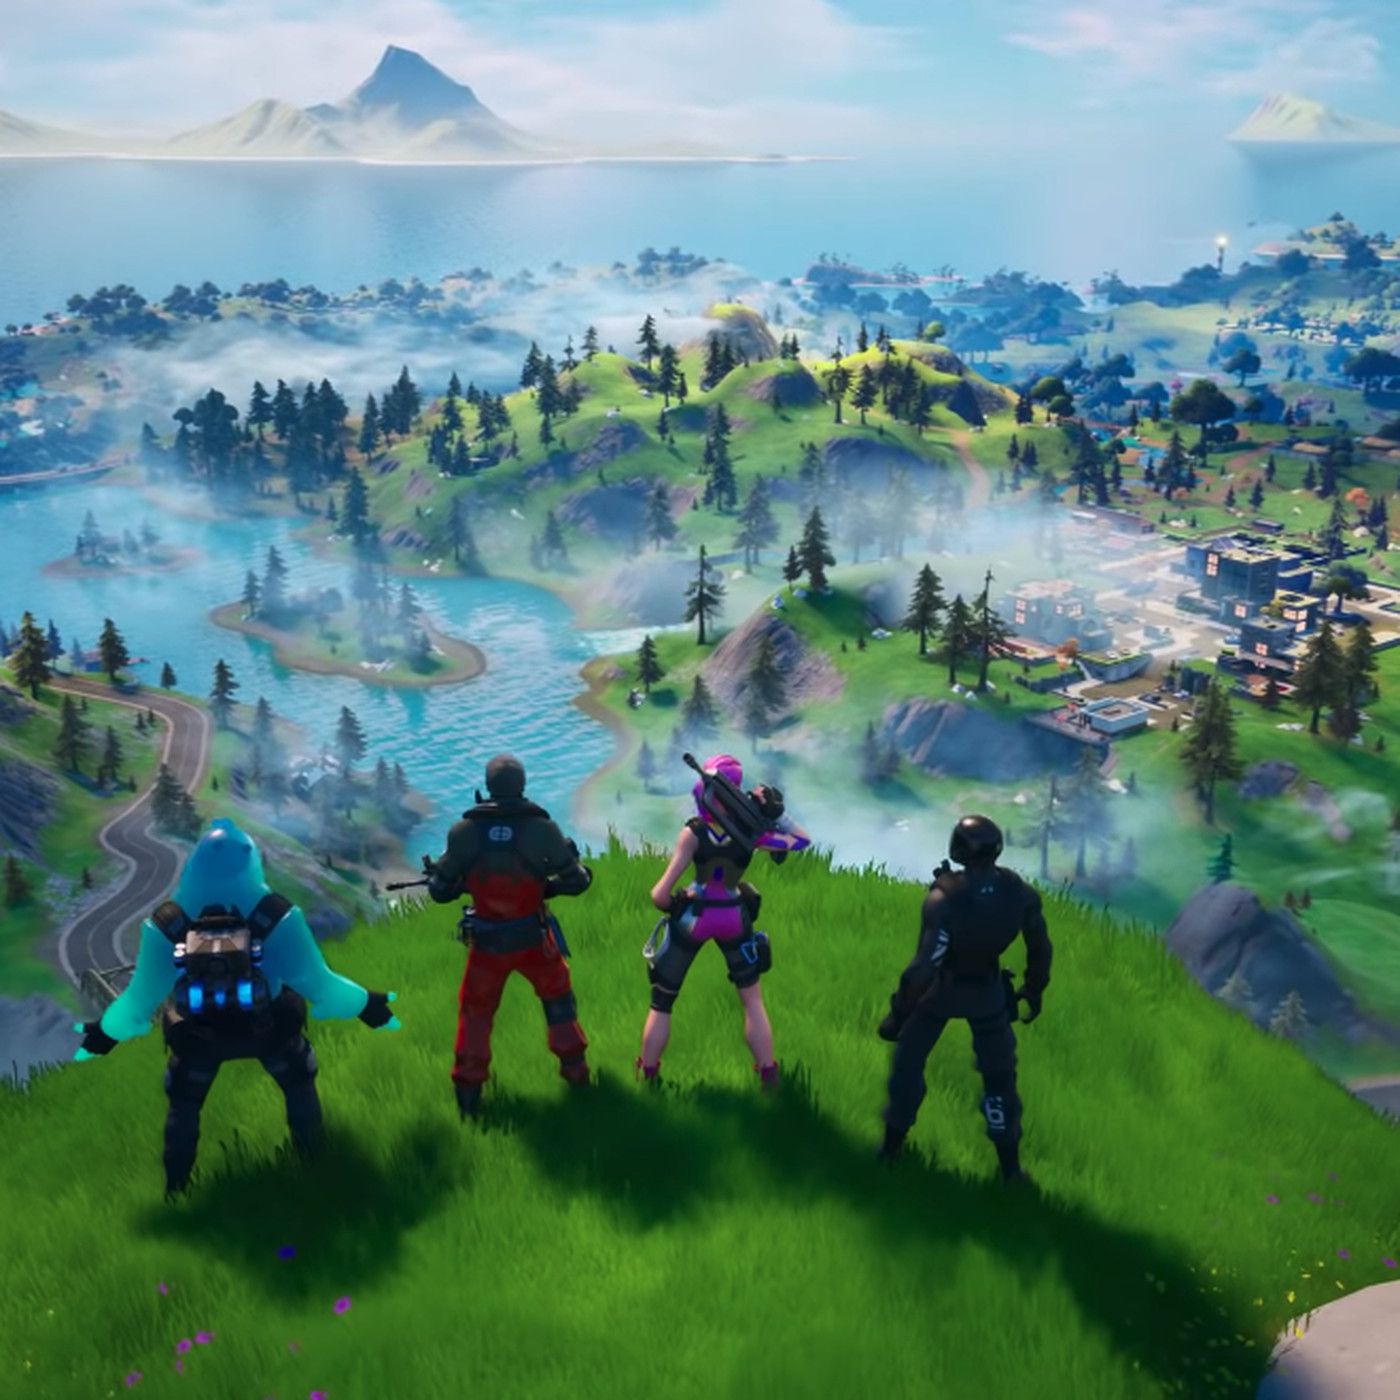 Fortnite is exciting again